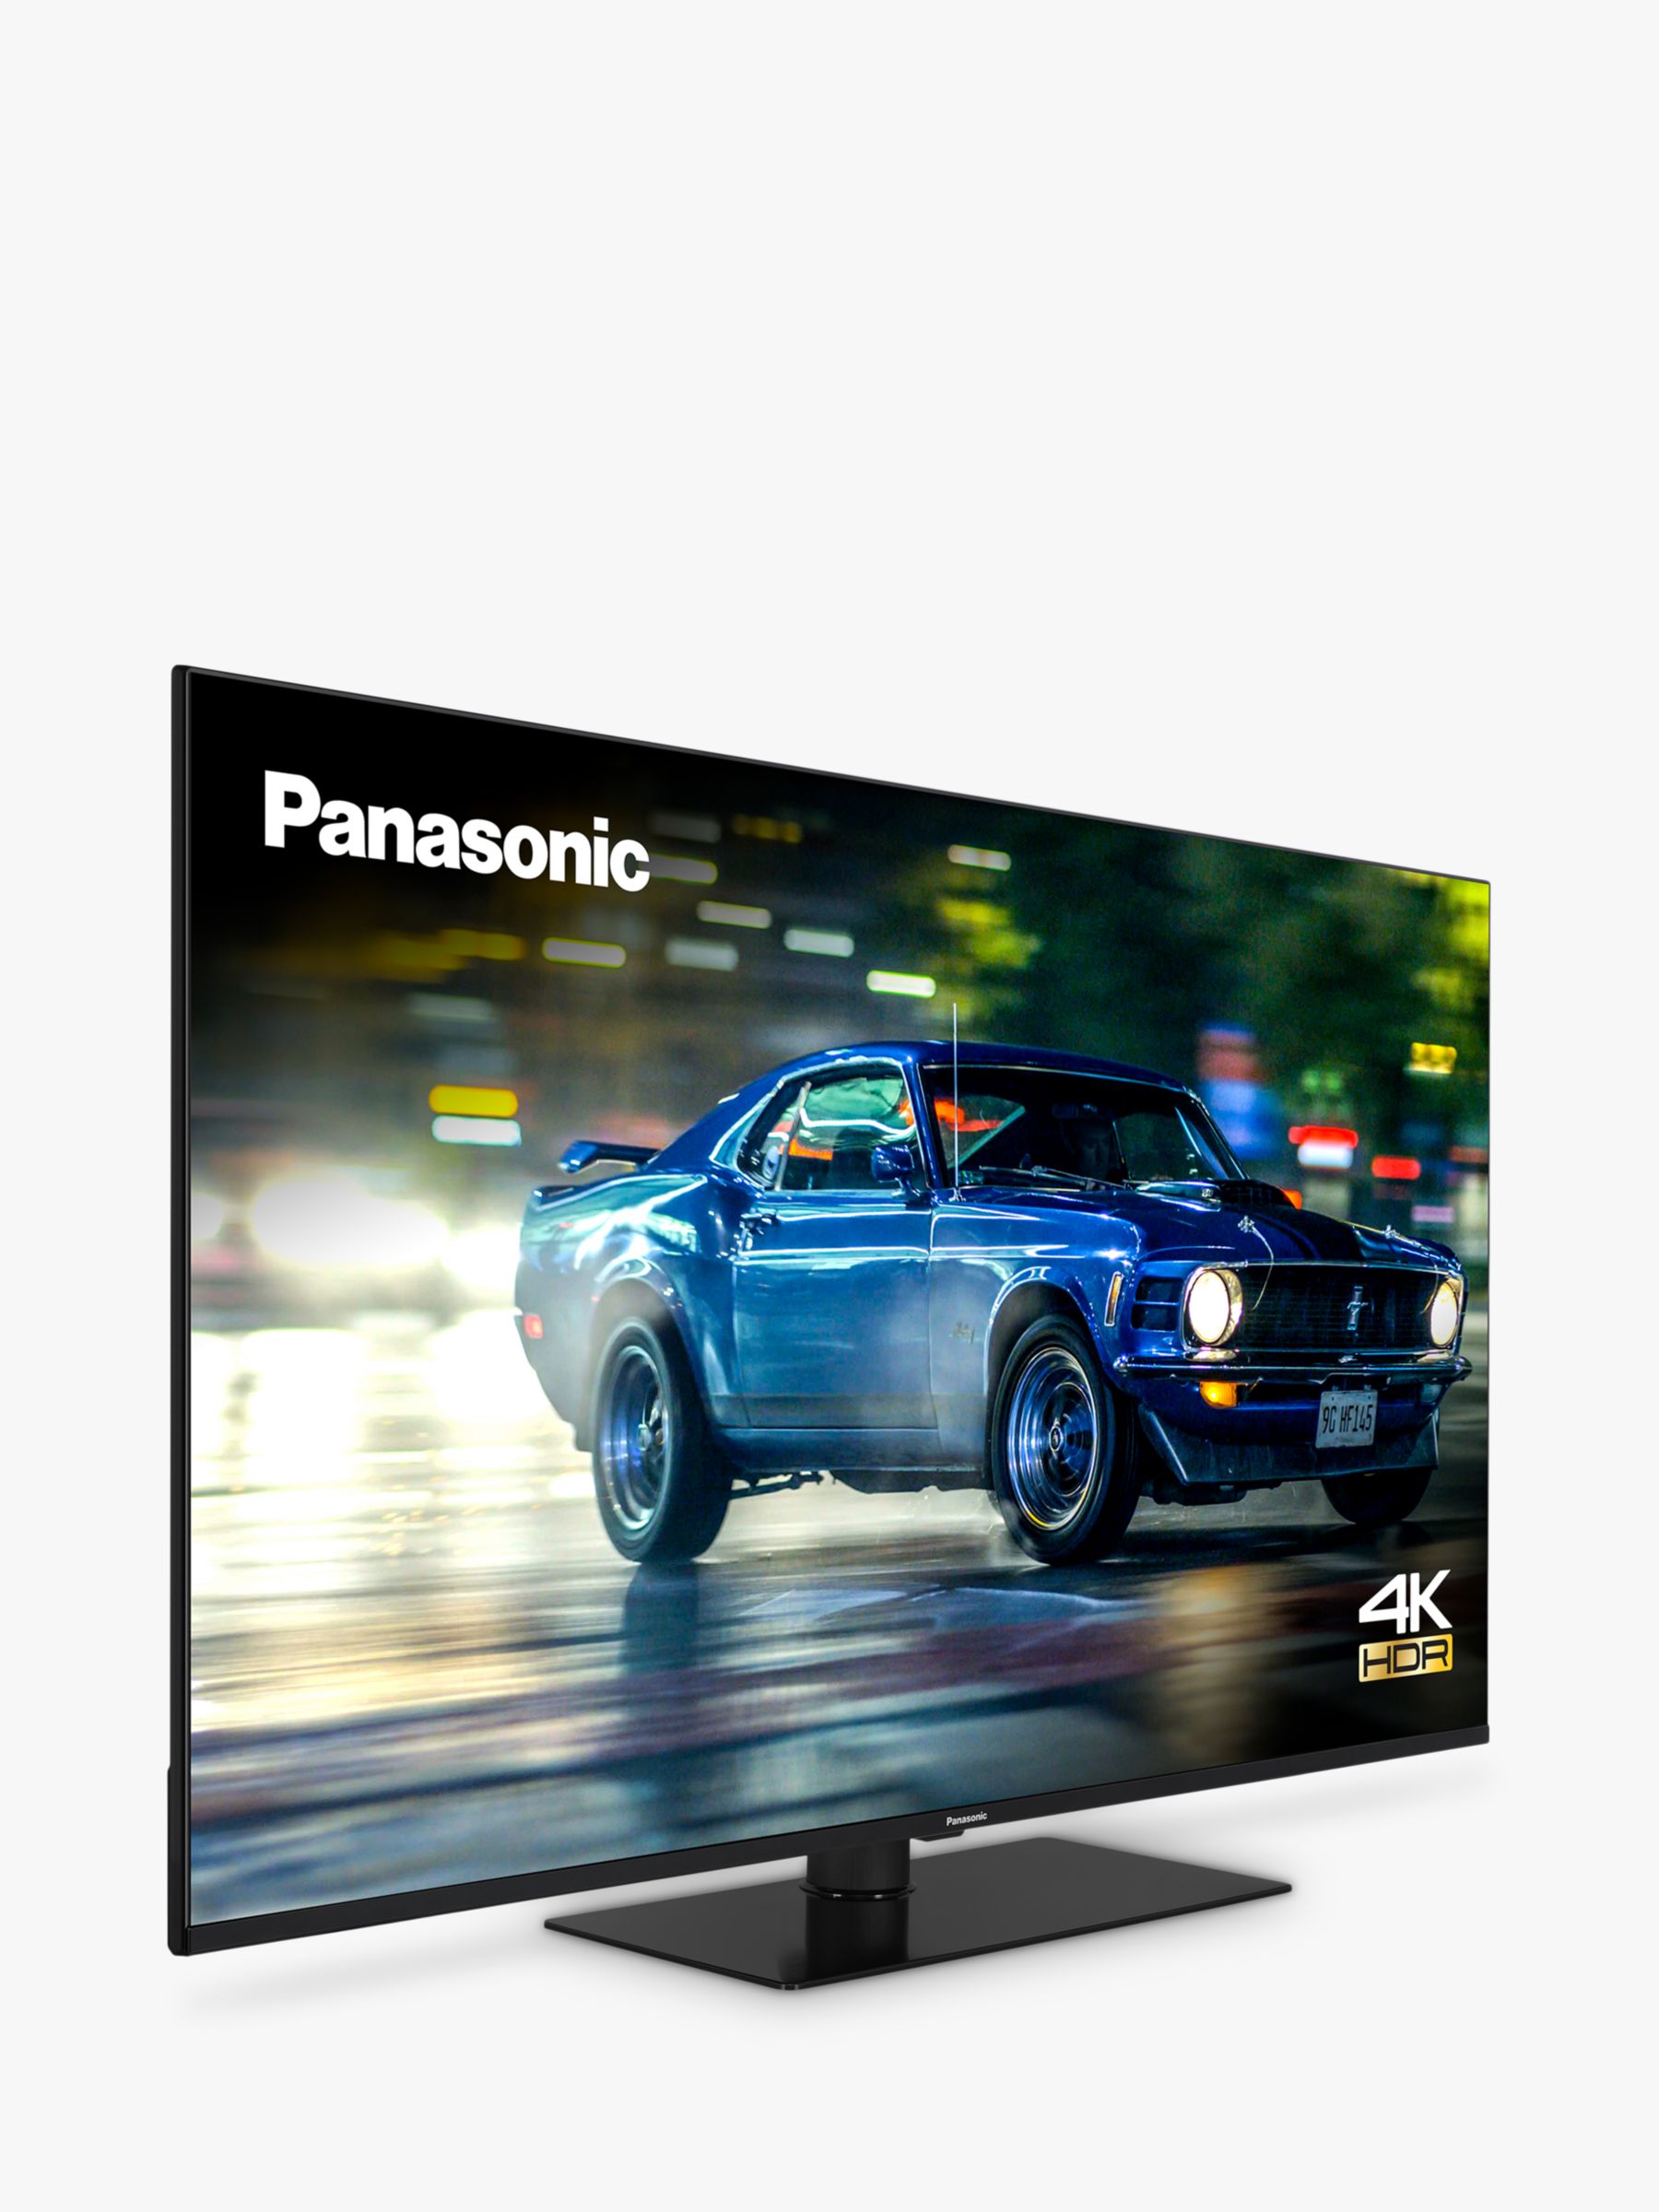 Panasonic Tx 43hx600b 2020 Led Hdr 4k Ultra Hd Smart Tv 43 Inch With Freeview Play And Dolby 0067